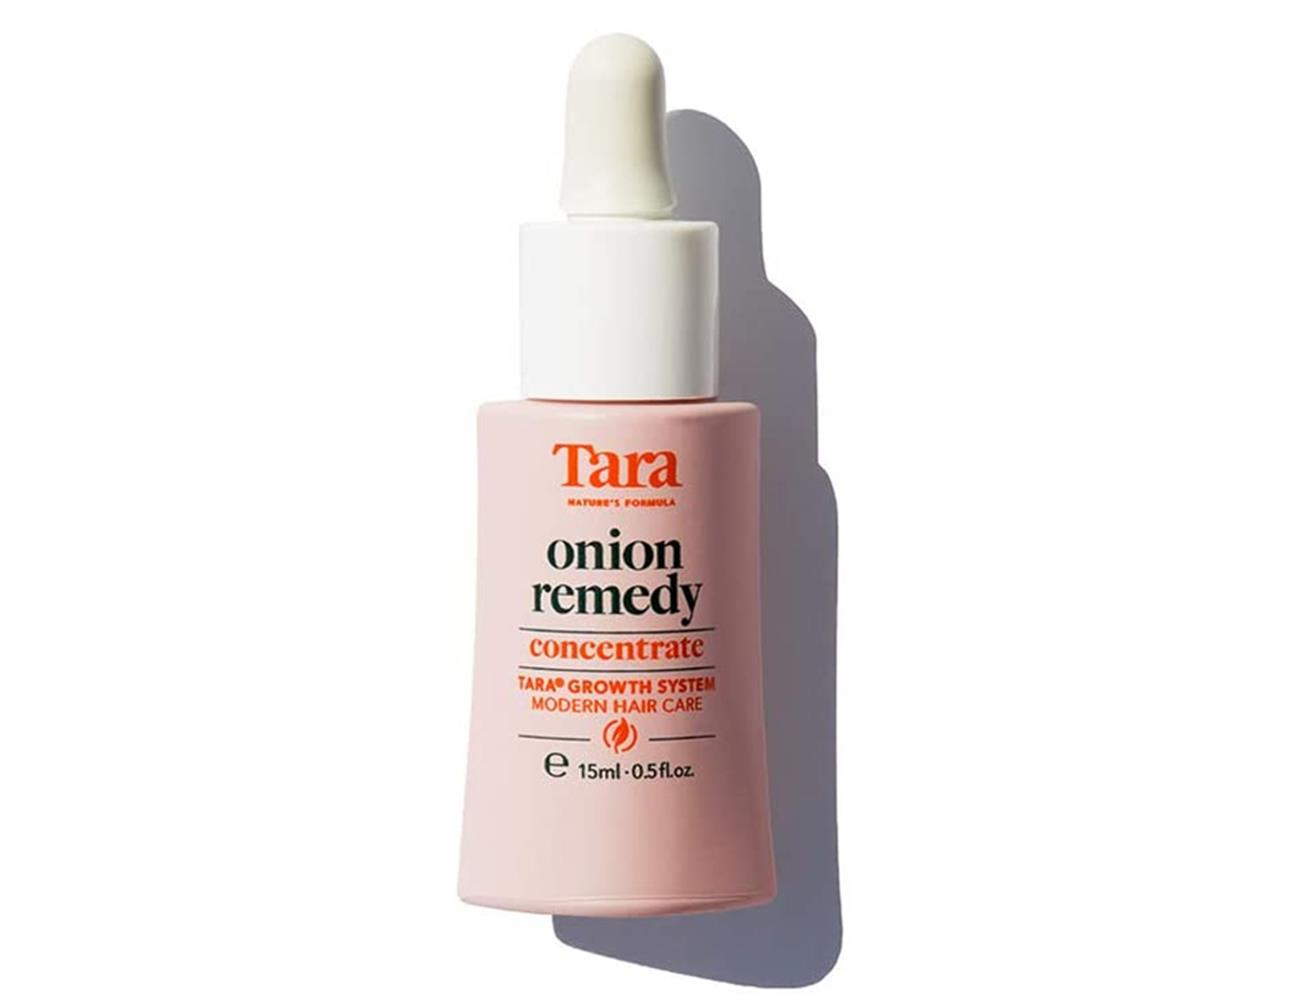 TARA ONION REMEDY CONCENTRATE